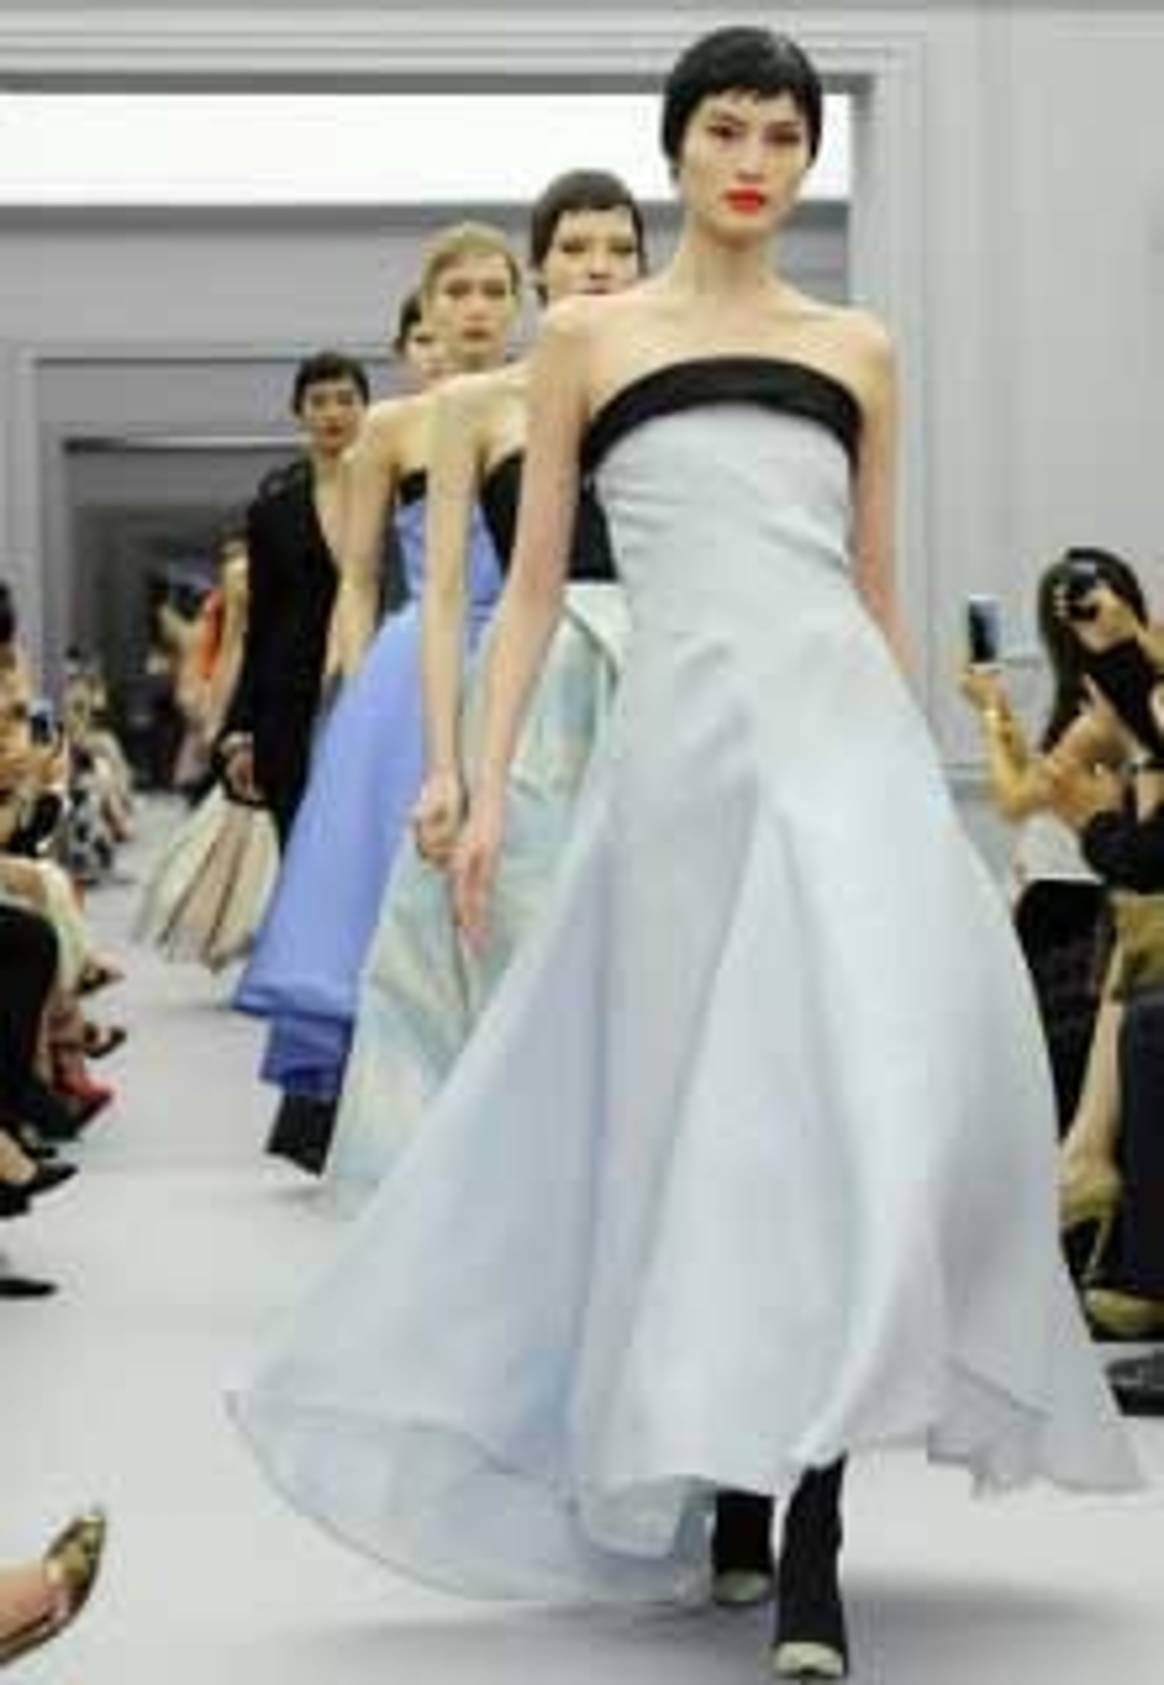 Dior banks on Haute Couture in China